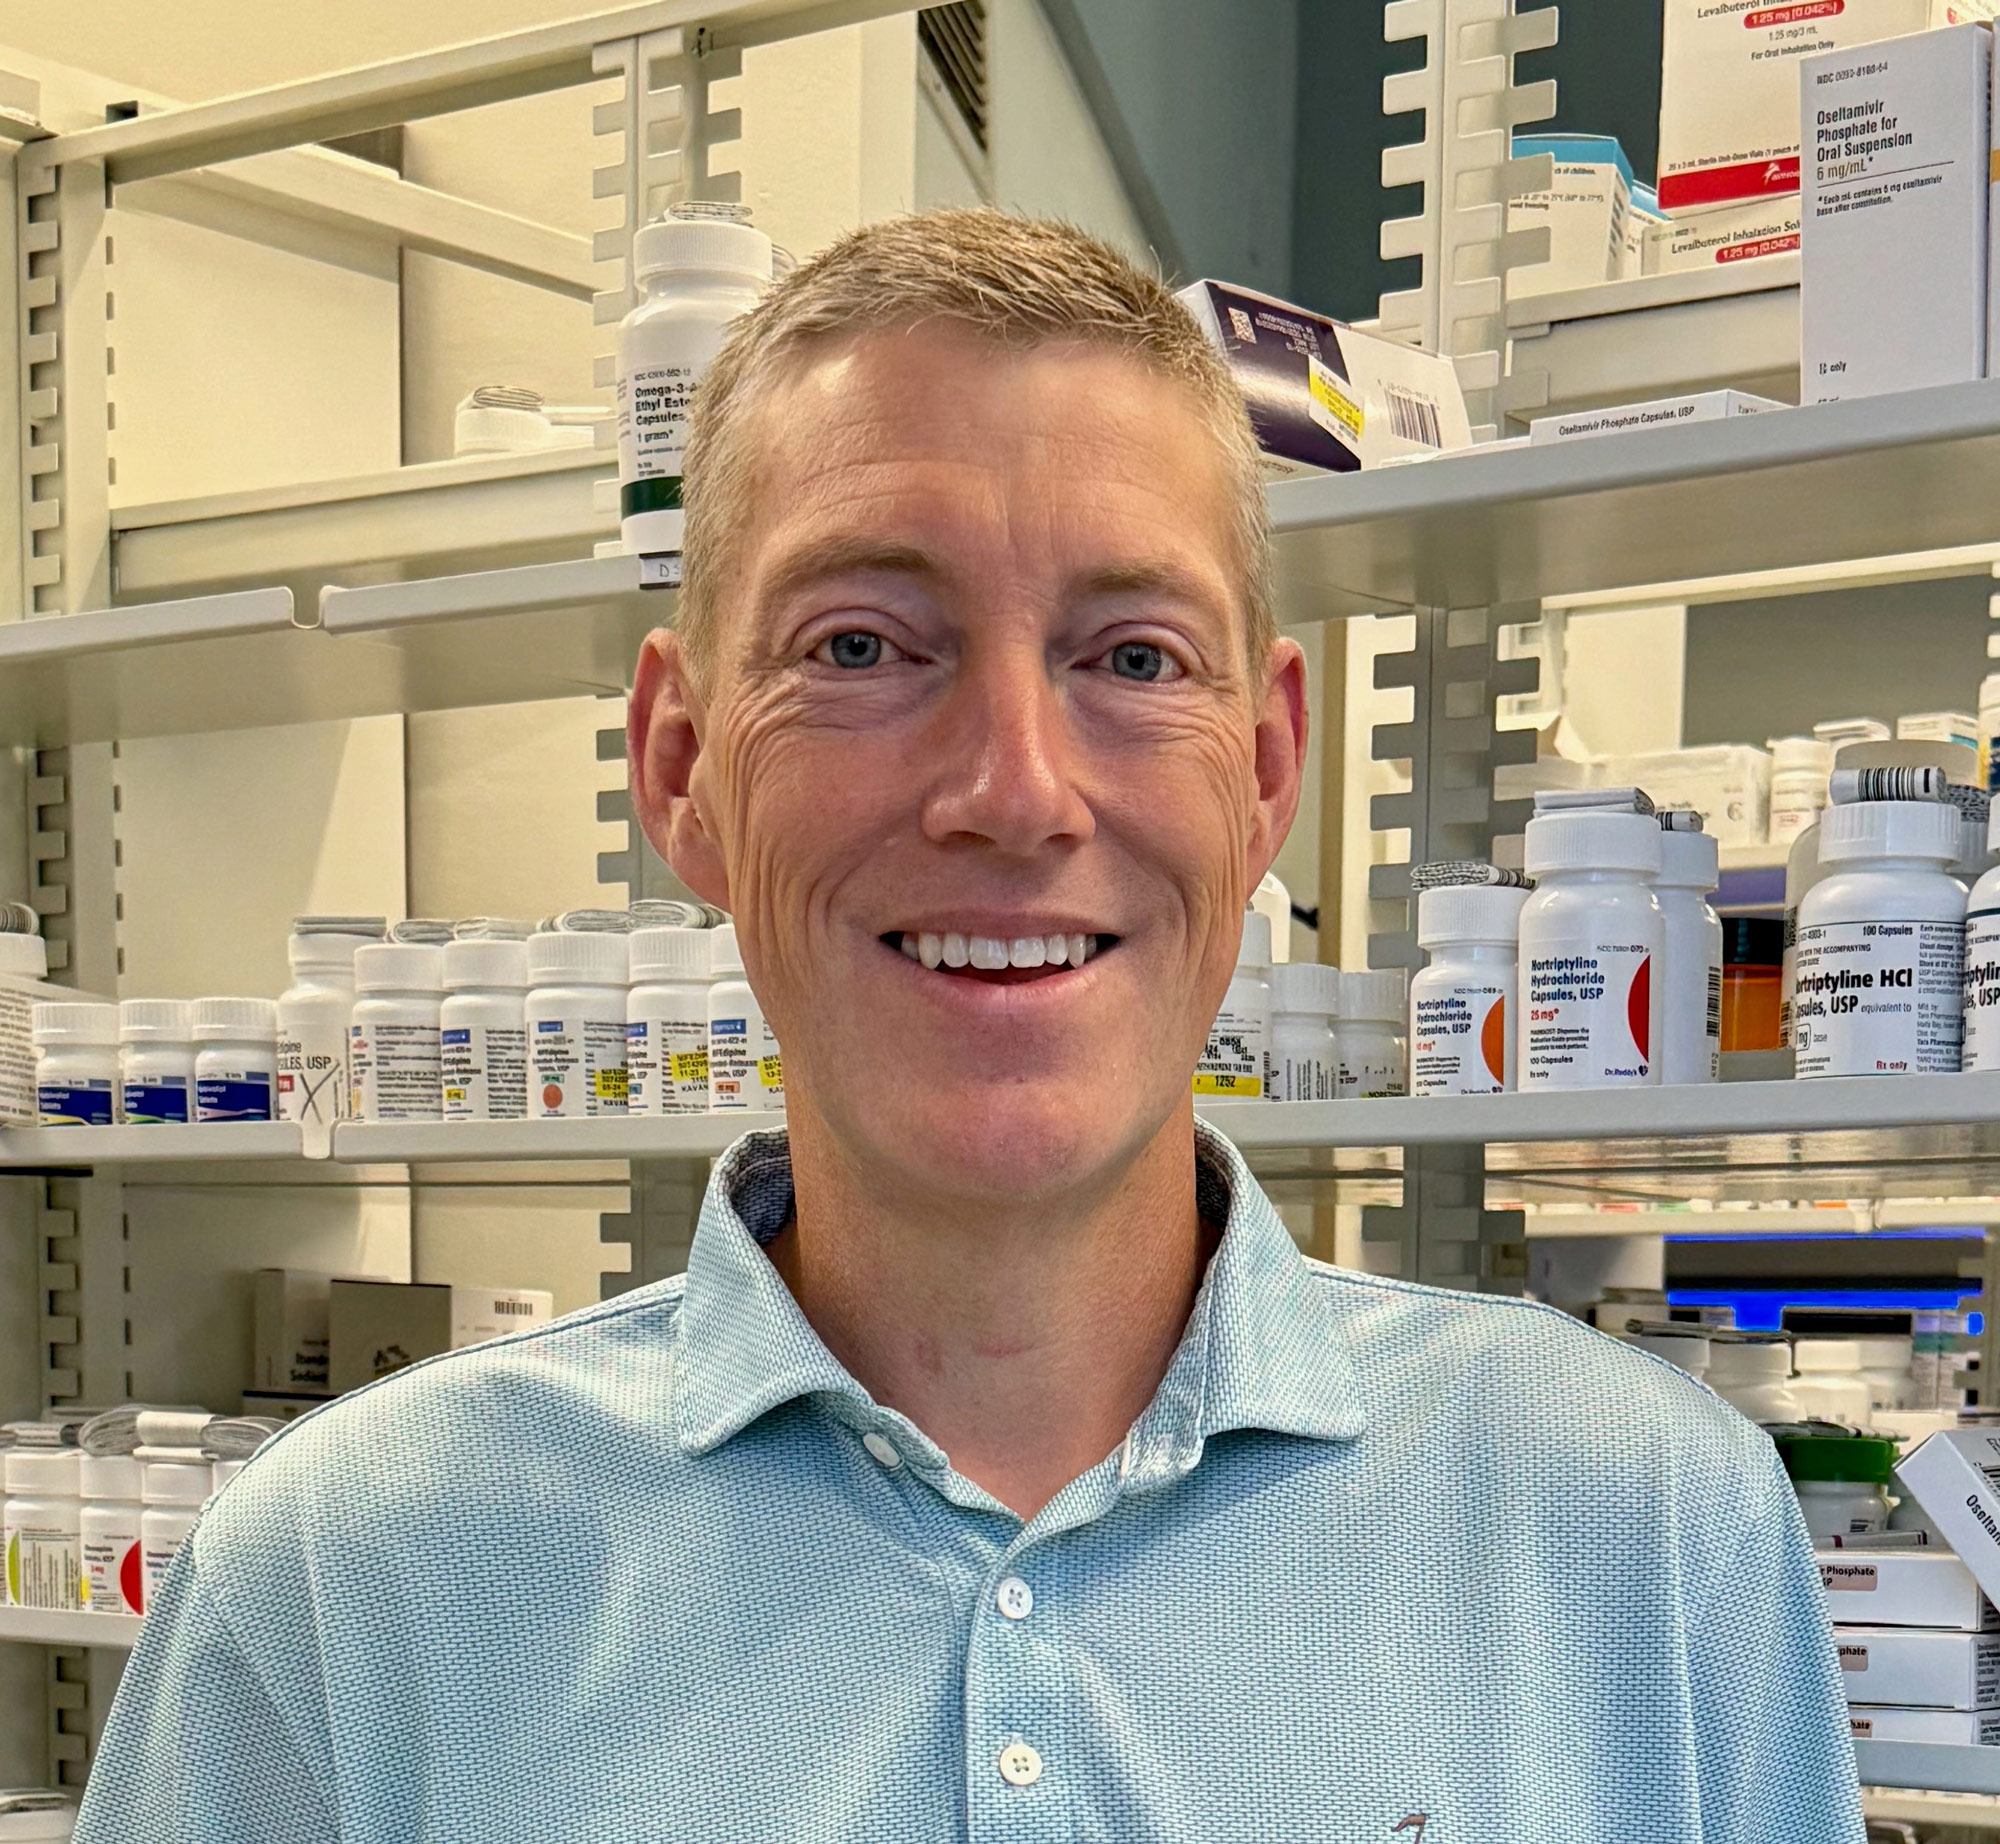 A photo of a man smiling in front of shelves of prescriptions indoors.